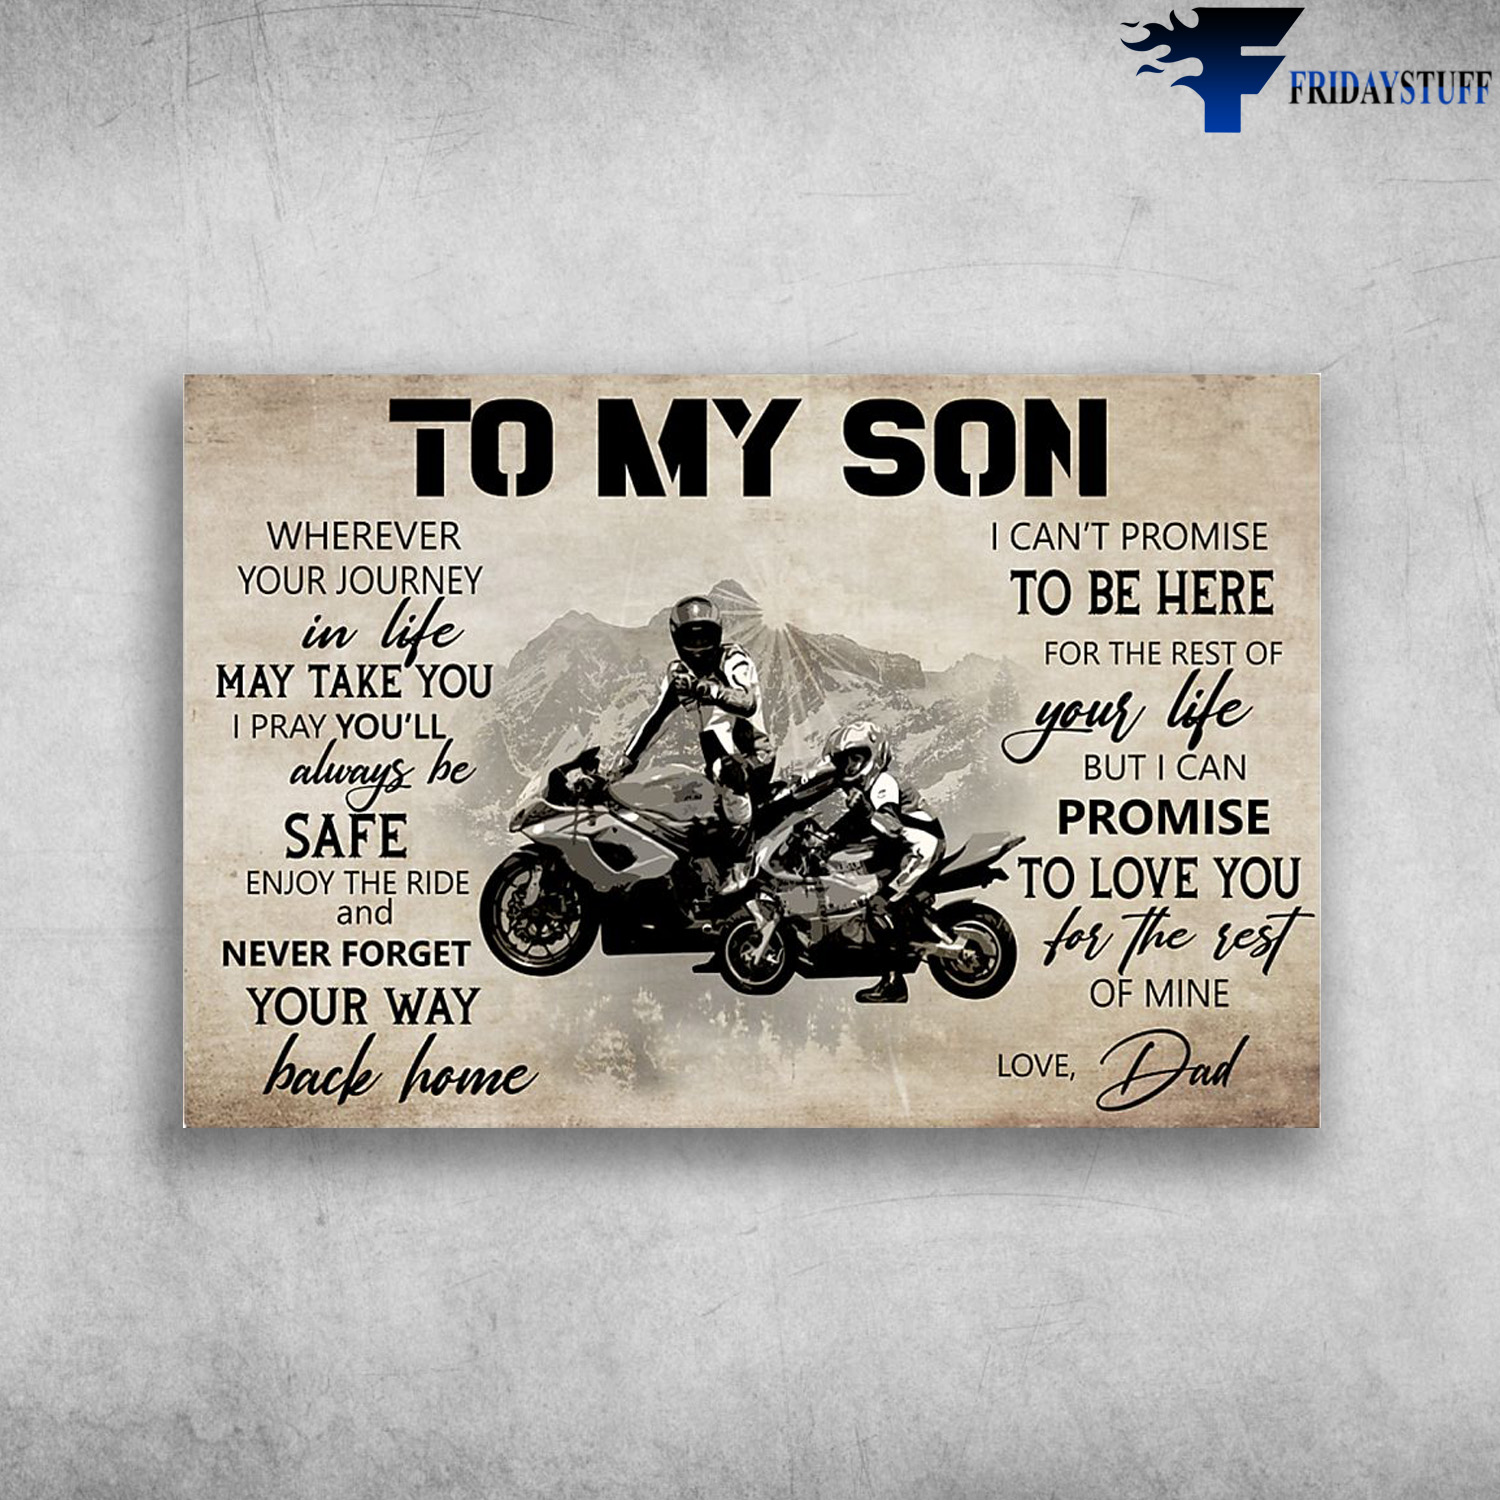 Biker, Dad And Son Motorcycling – To My Son, Wherever Your Journey In Life May Take You, I Pray You’ll Always Be Safe, Enjoy The Ride And Never Forget Your Way Back Home, I Can’t Promise To Be Here For The Rest Of Your Life